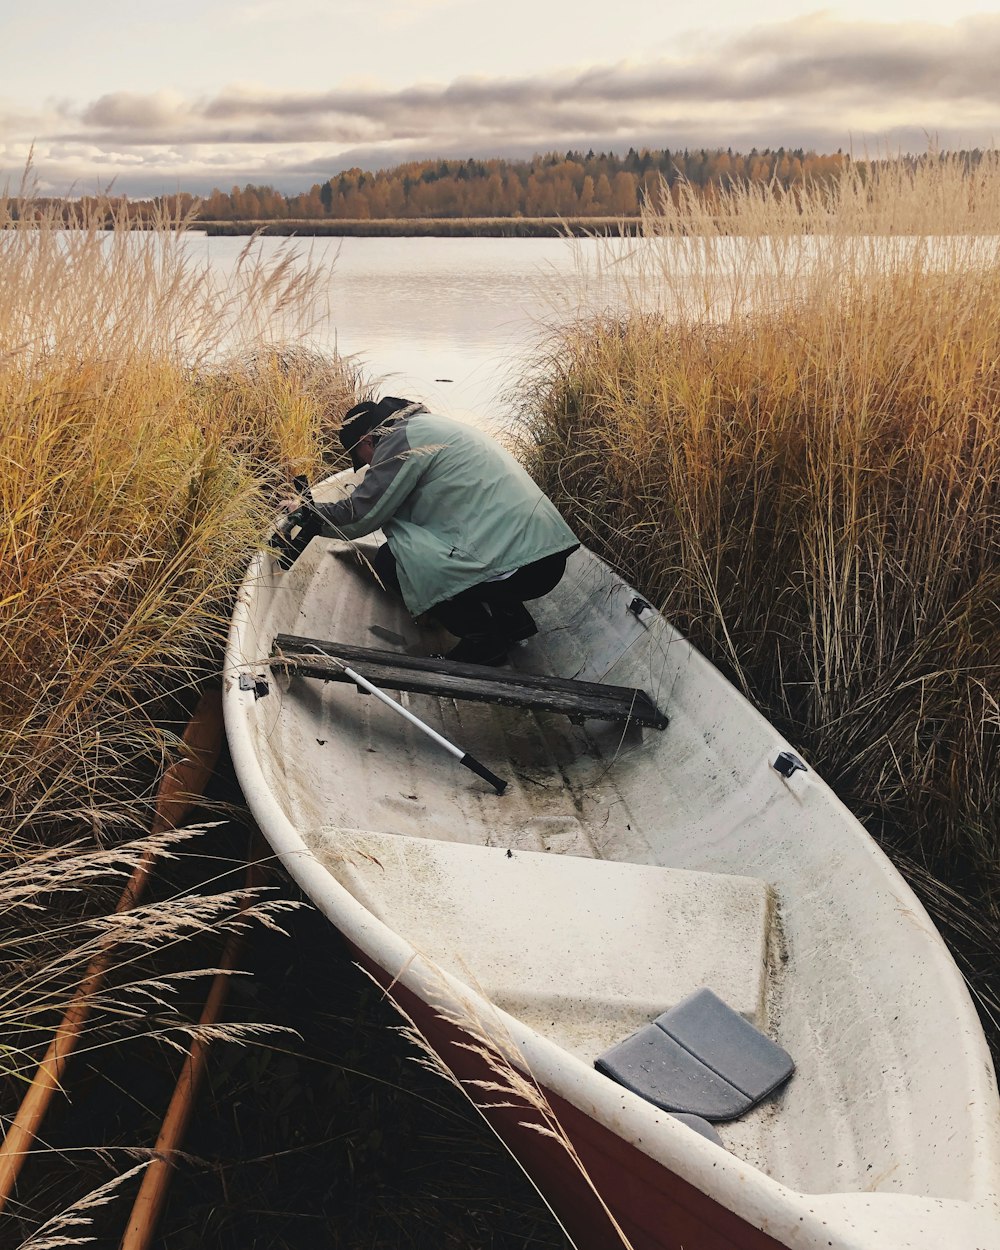 man in gray jacket riding white canoe on brown grass field during daytime